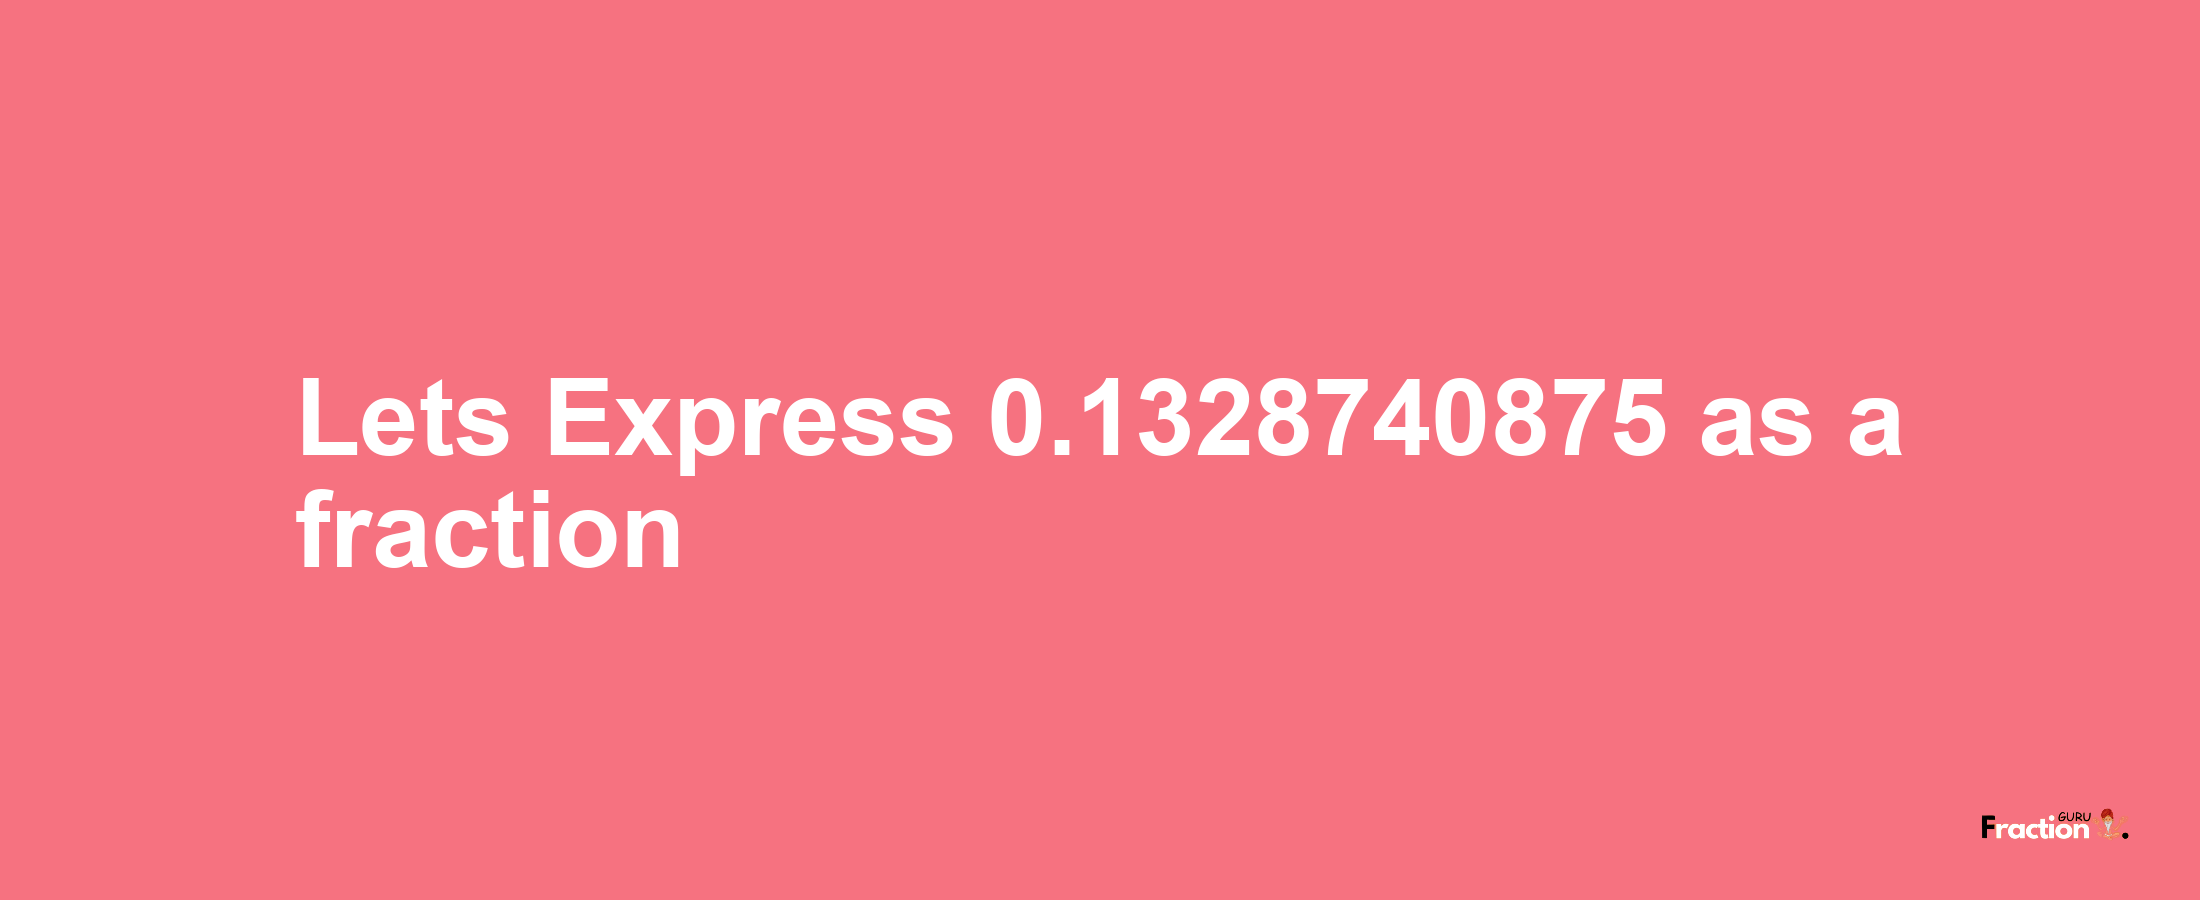 Lets Express 0.1328740875 as afraction